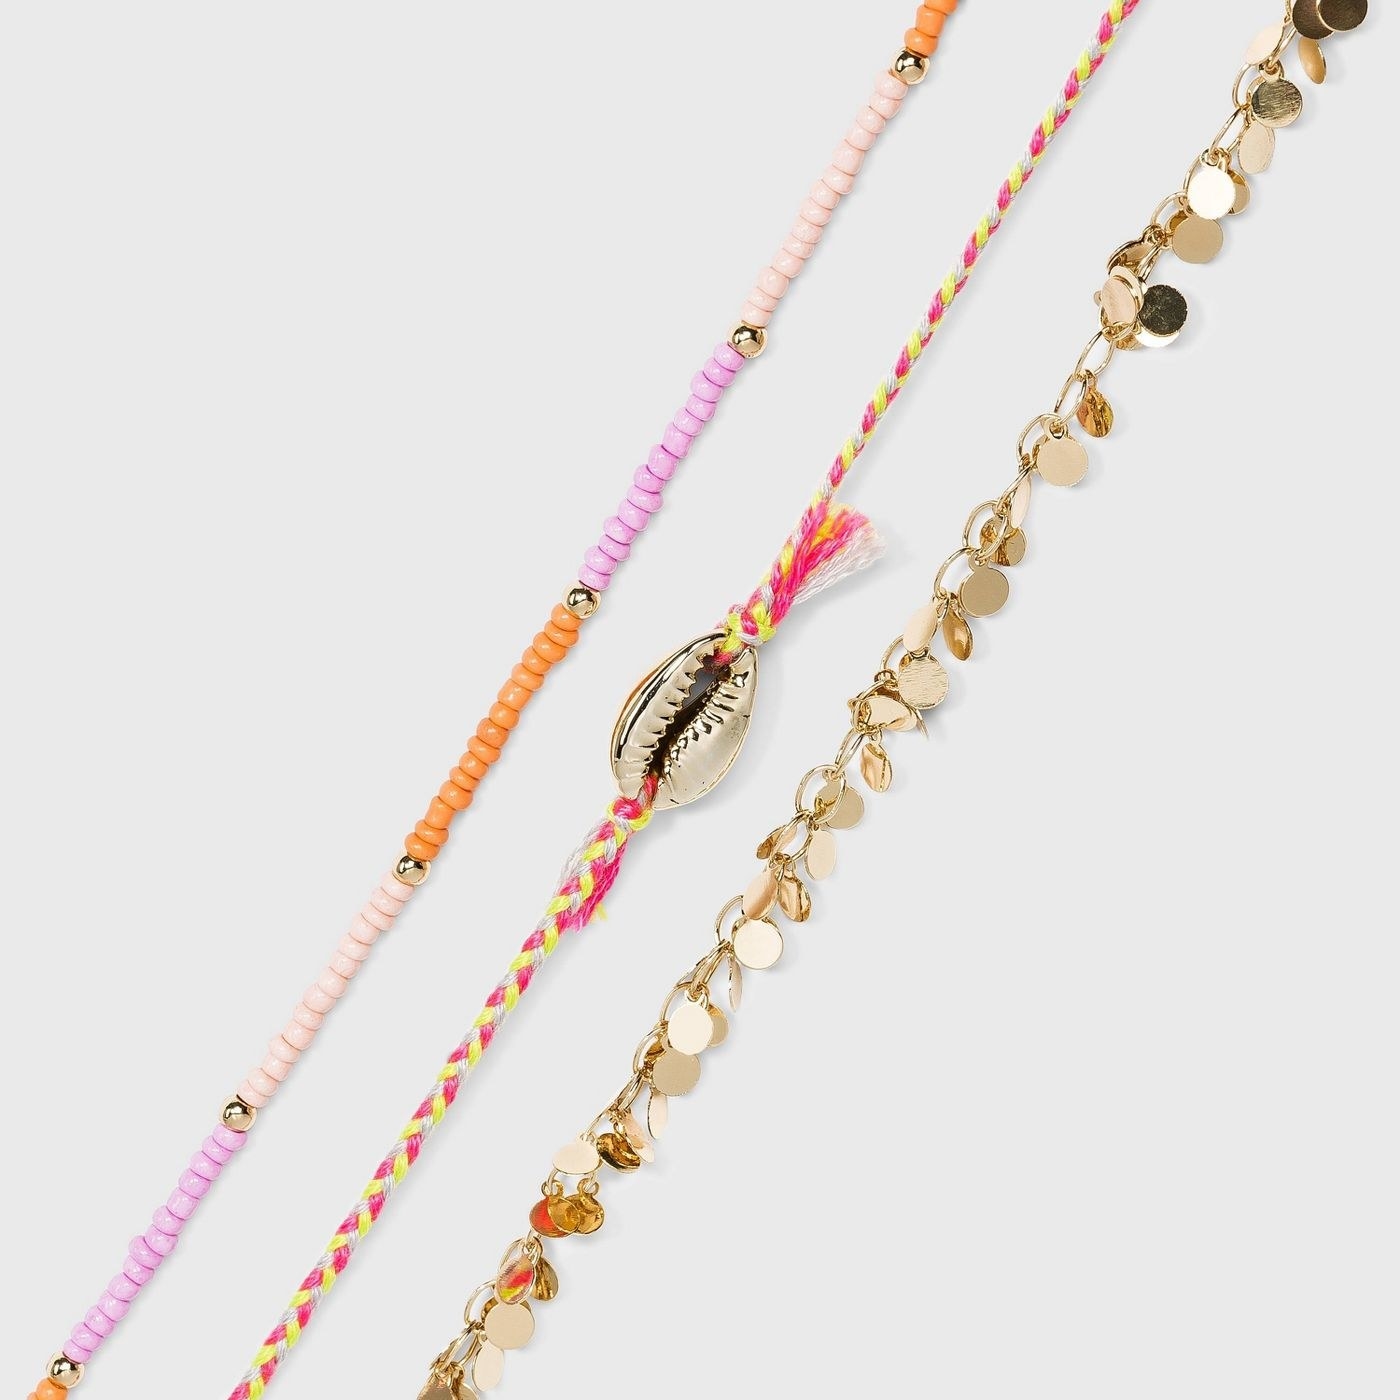 Three anklets with gold cord and colorful beads